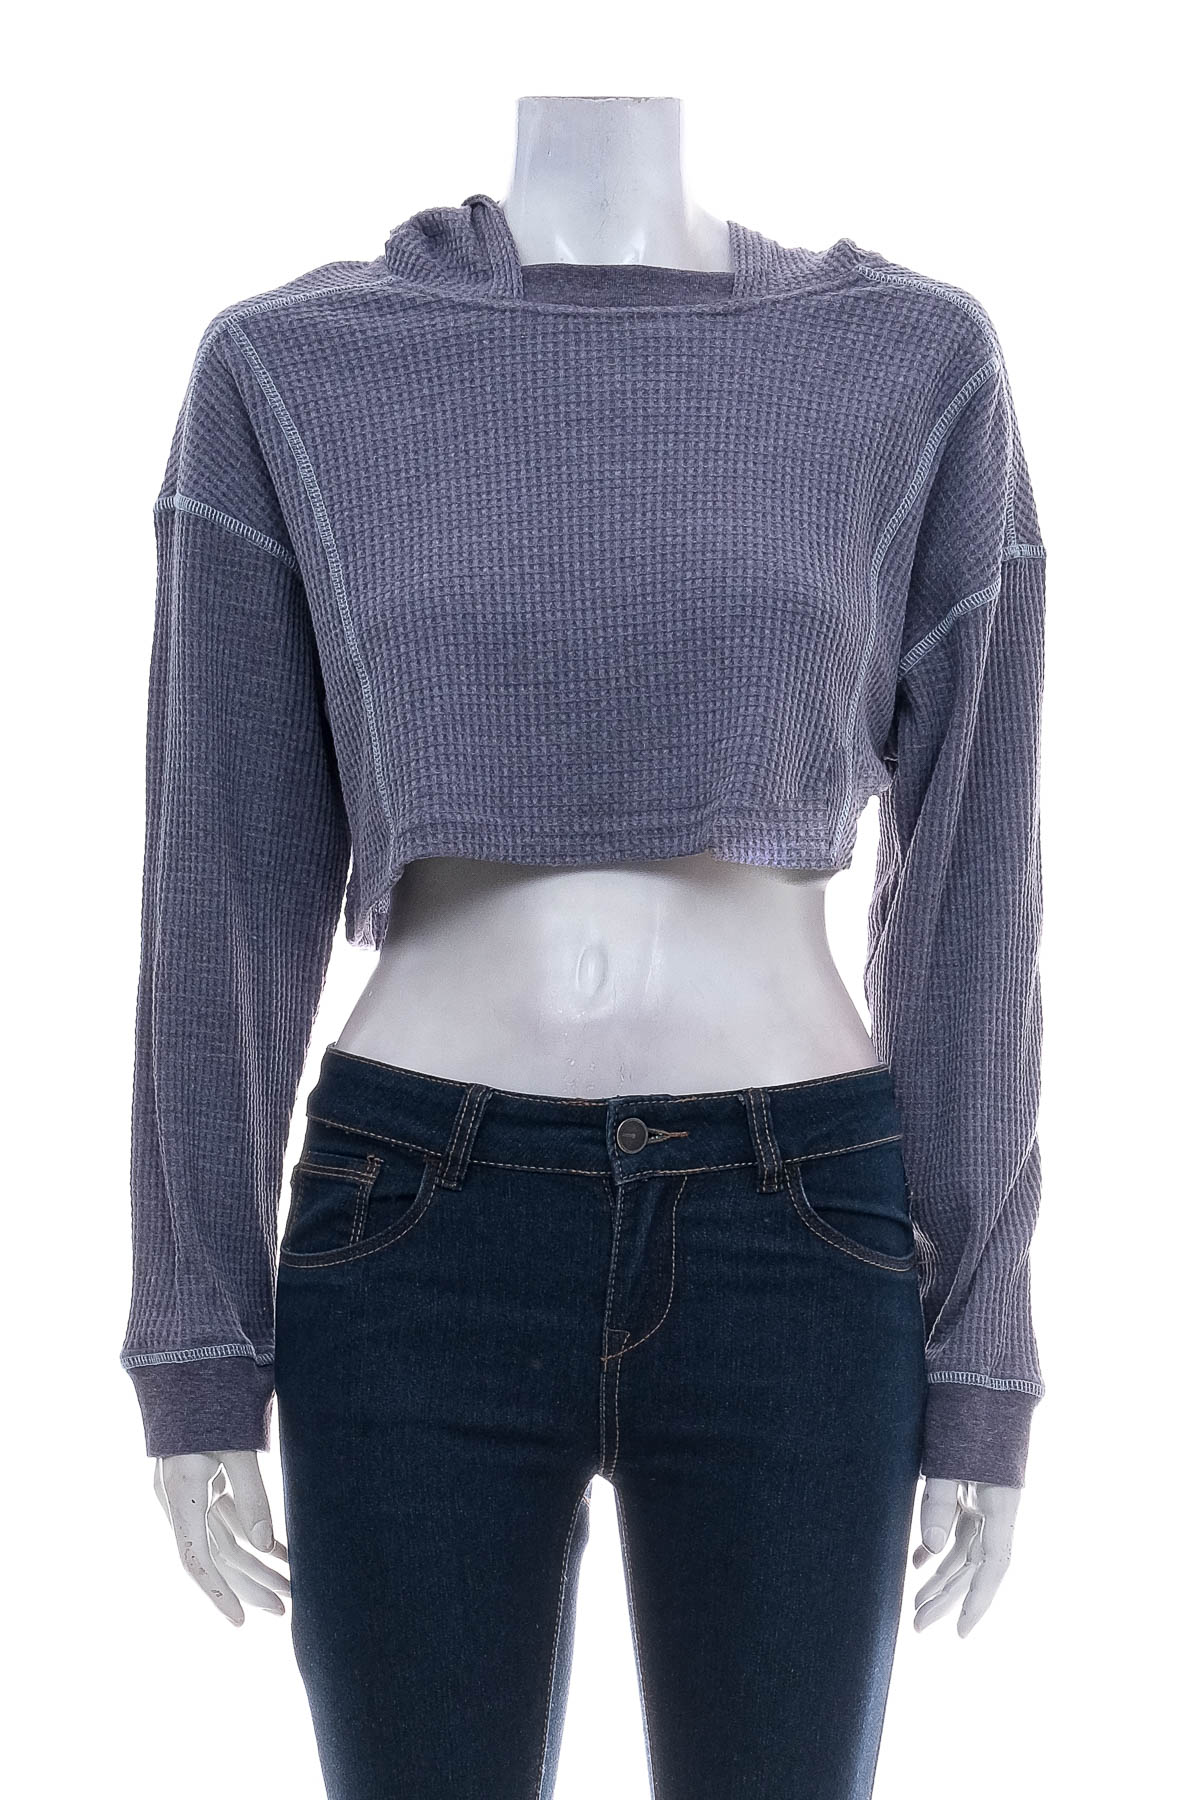 Women's sweater - Almost Famous - 0